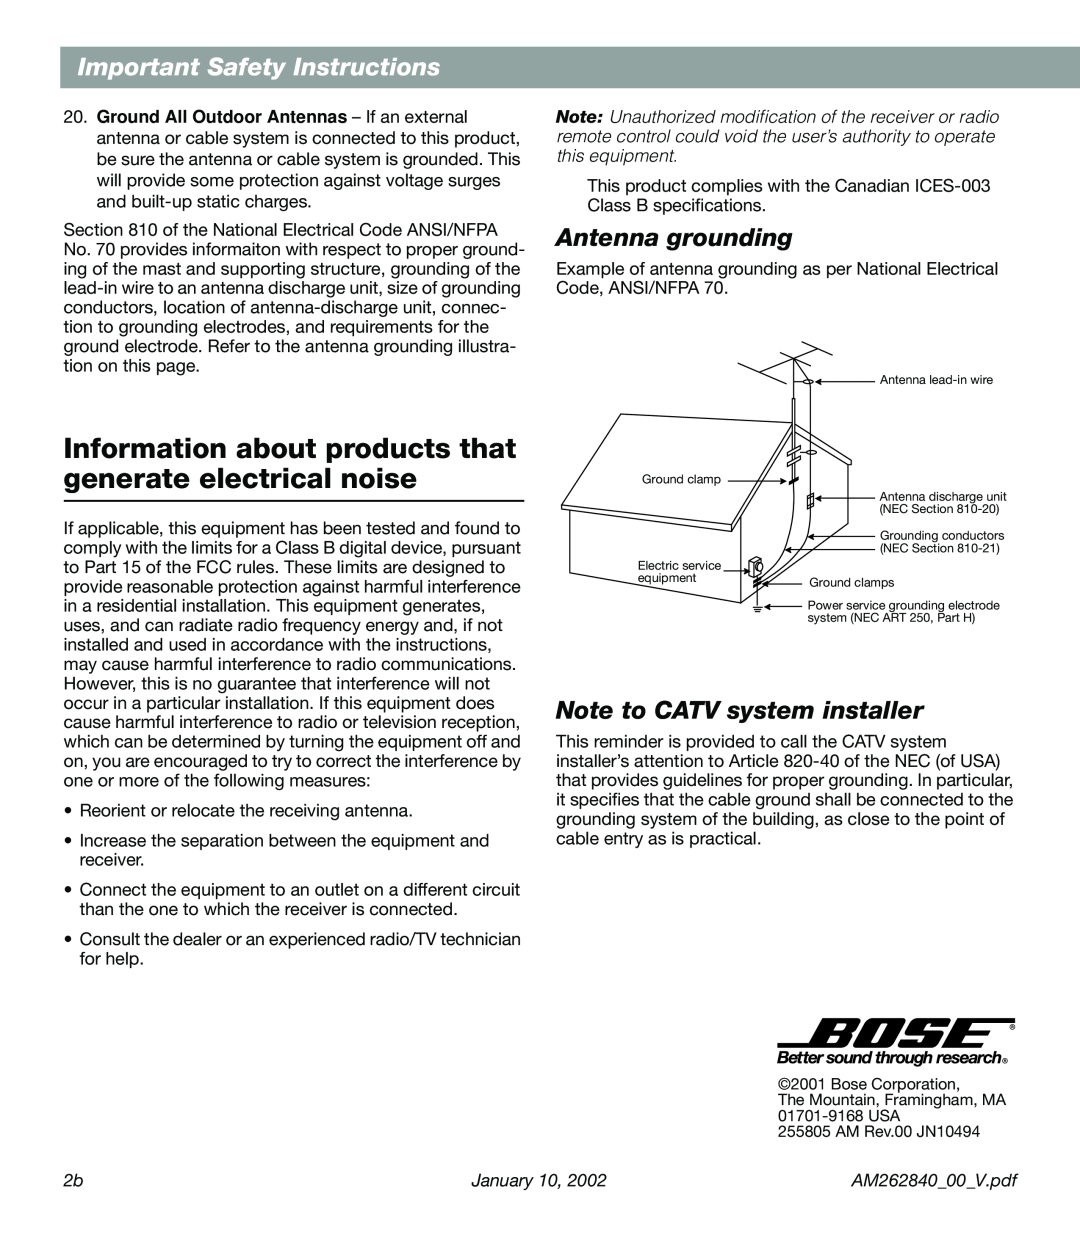 Bose AM262840 manual Antenna grounding, Note to CATV system installer, Important Safety Instructions, January 